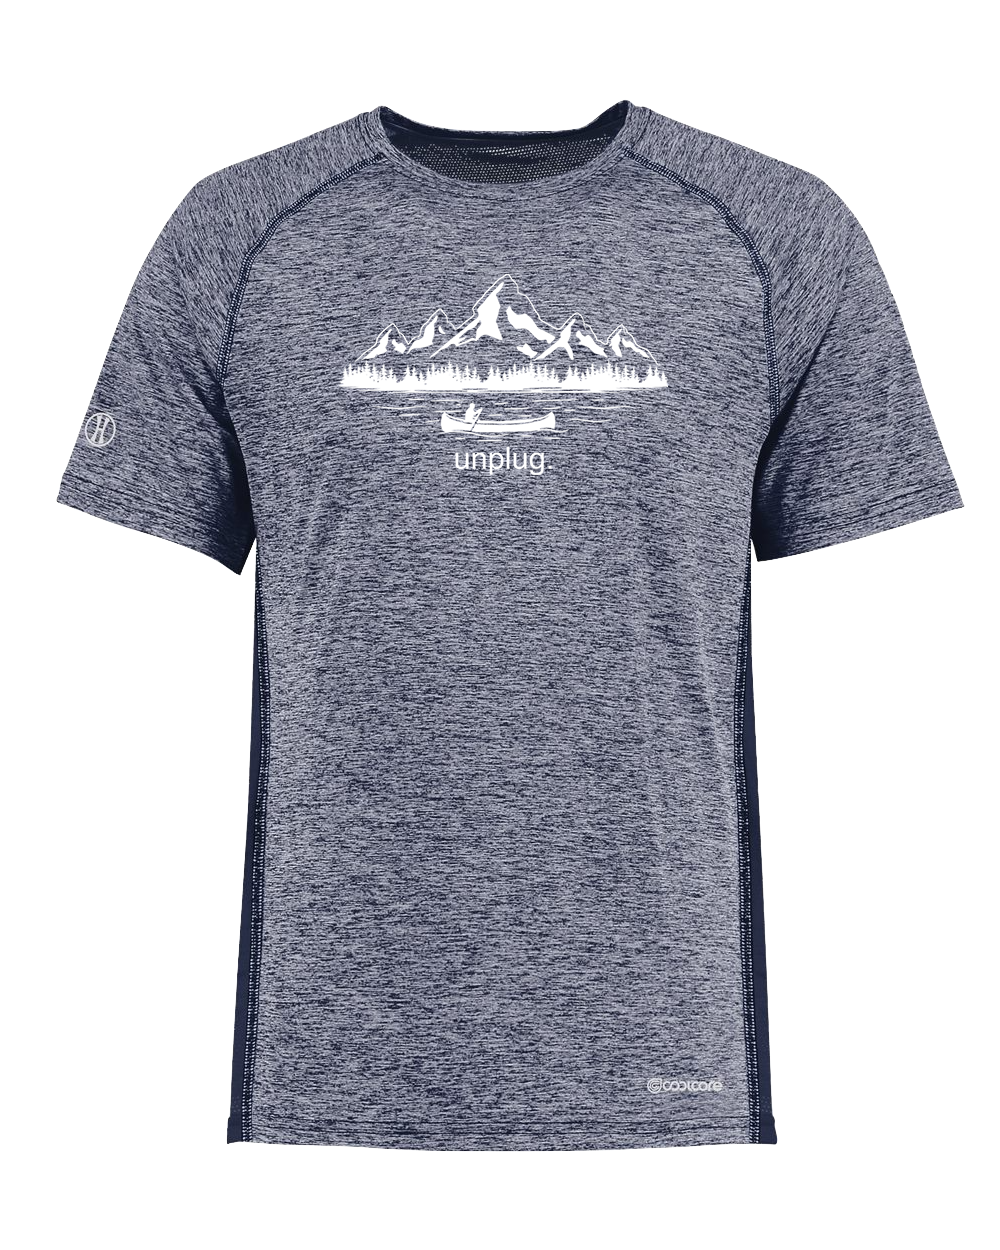 CANOEING IN THE MOUNTAINS Poly/Elastane High Performance T-Shirt with UPF 50+